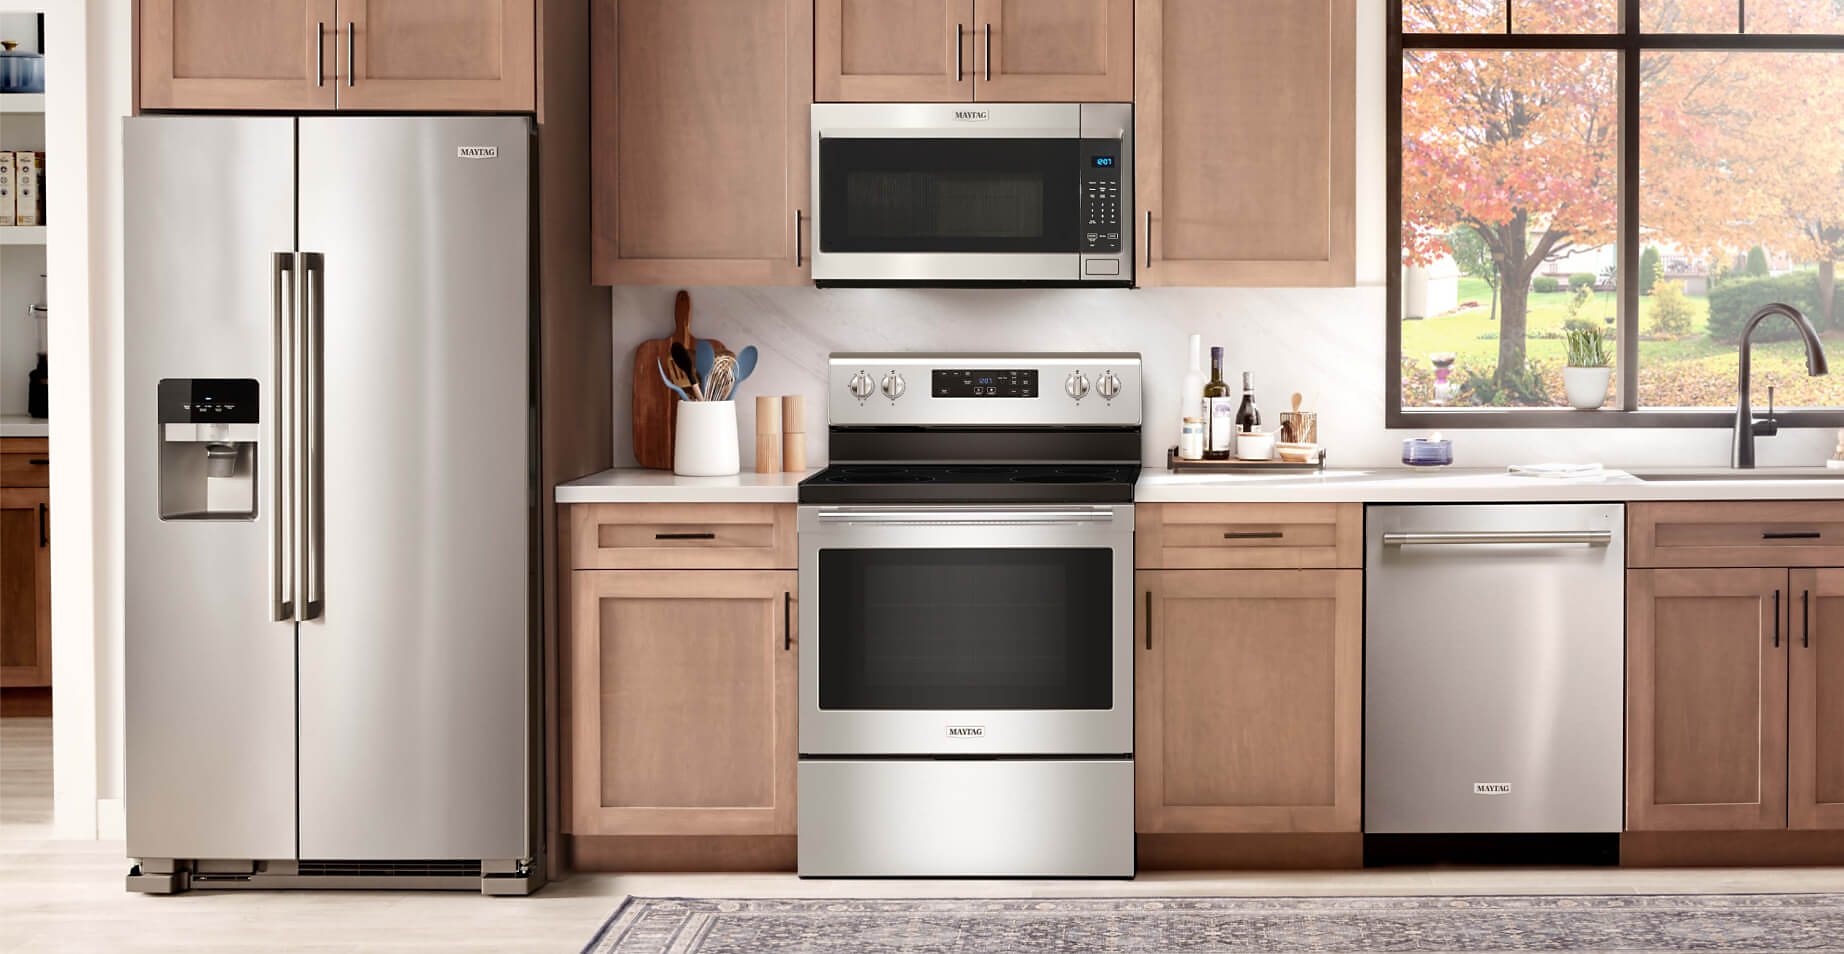 The Maytag® Performance Lineup refrigerator, over-the-range microwave, freestanding electric range and dishwasher in a kitchen with light brown cabinets